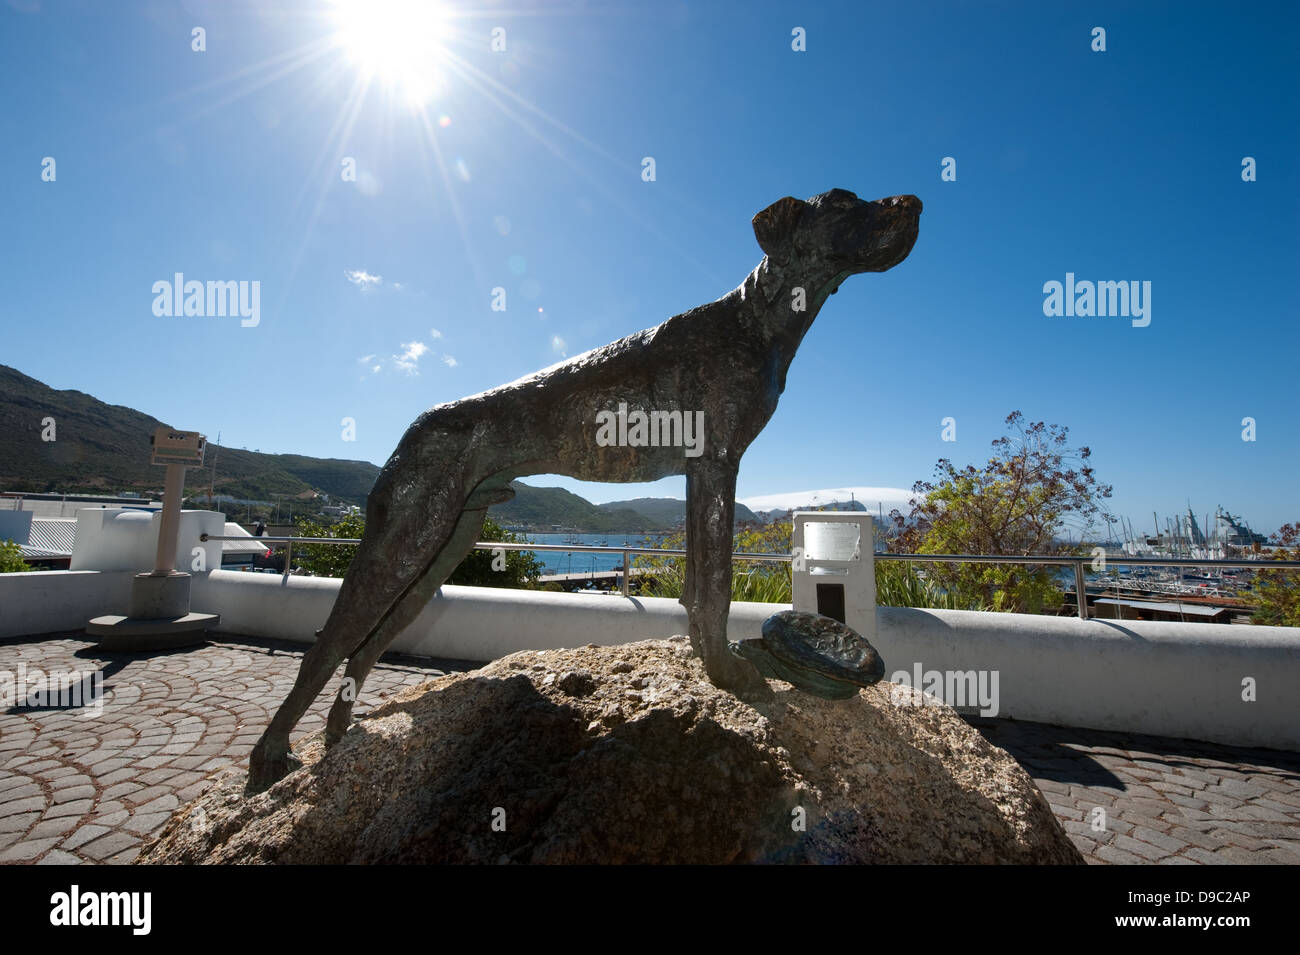 Statue of Just Nuisance, Jubilee Square, Simon's Town, False Bay, South Africa Stock Photo